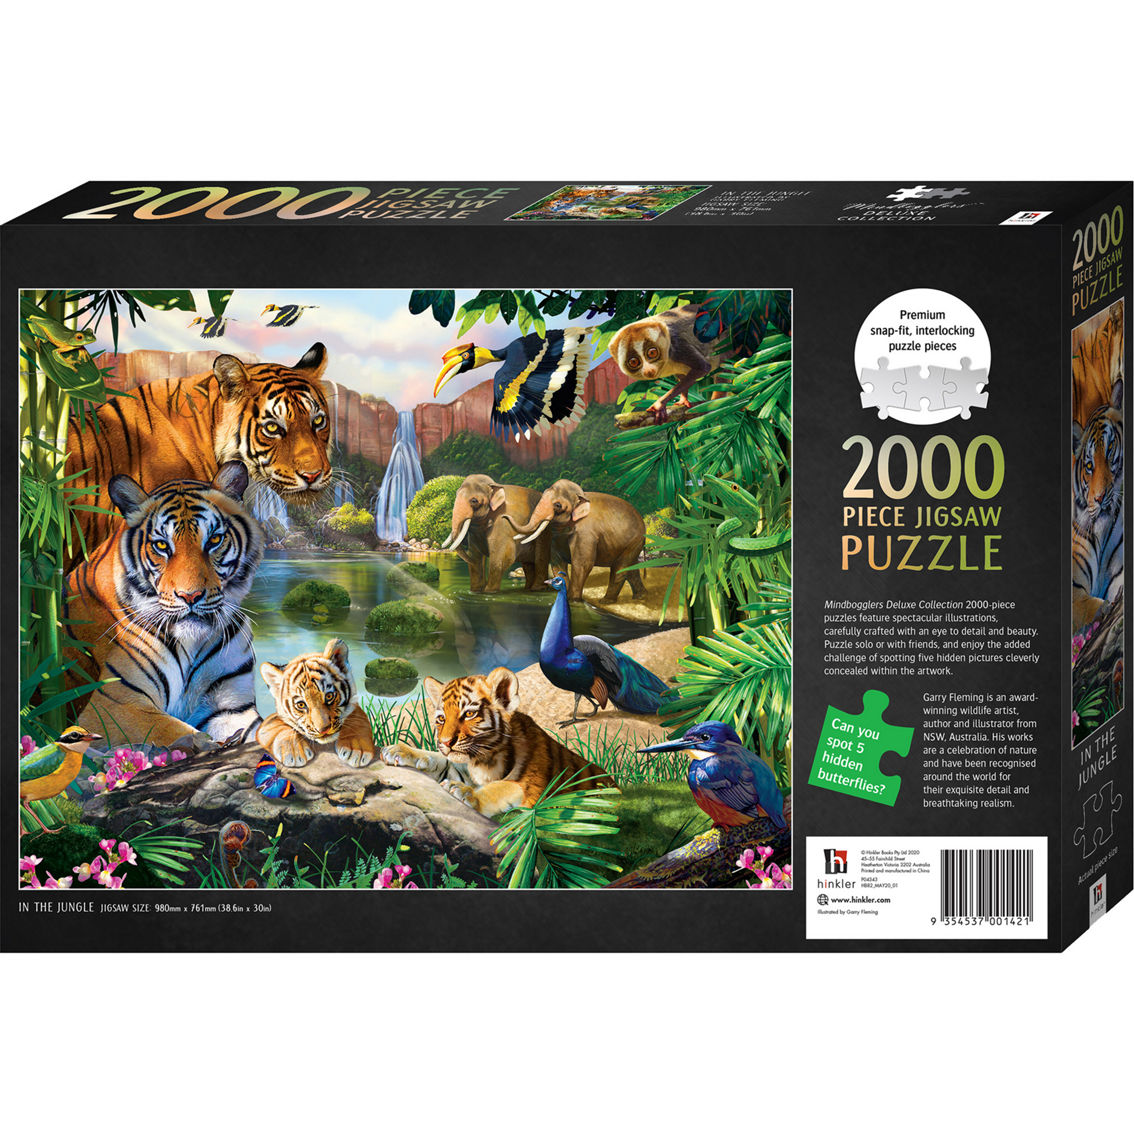 Mindbogglers Artisan in the Jungle 2000 pc. Puzzle - Image 2 of 8